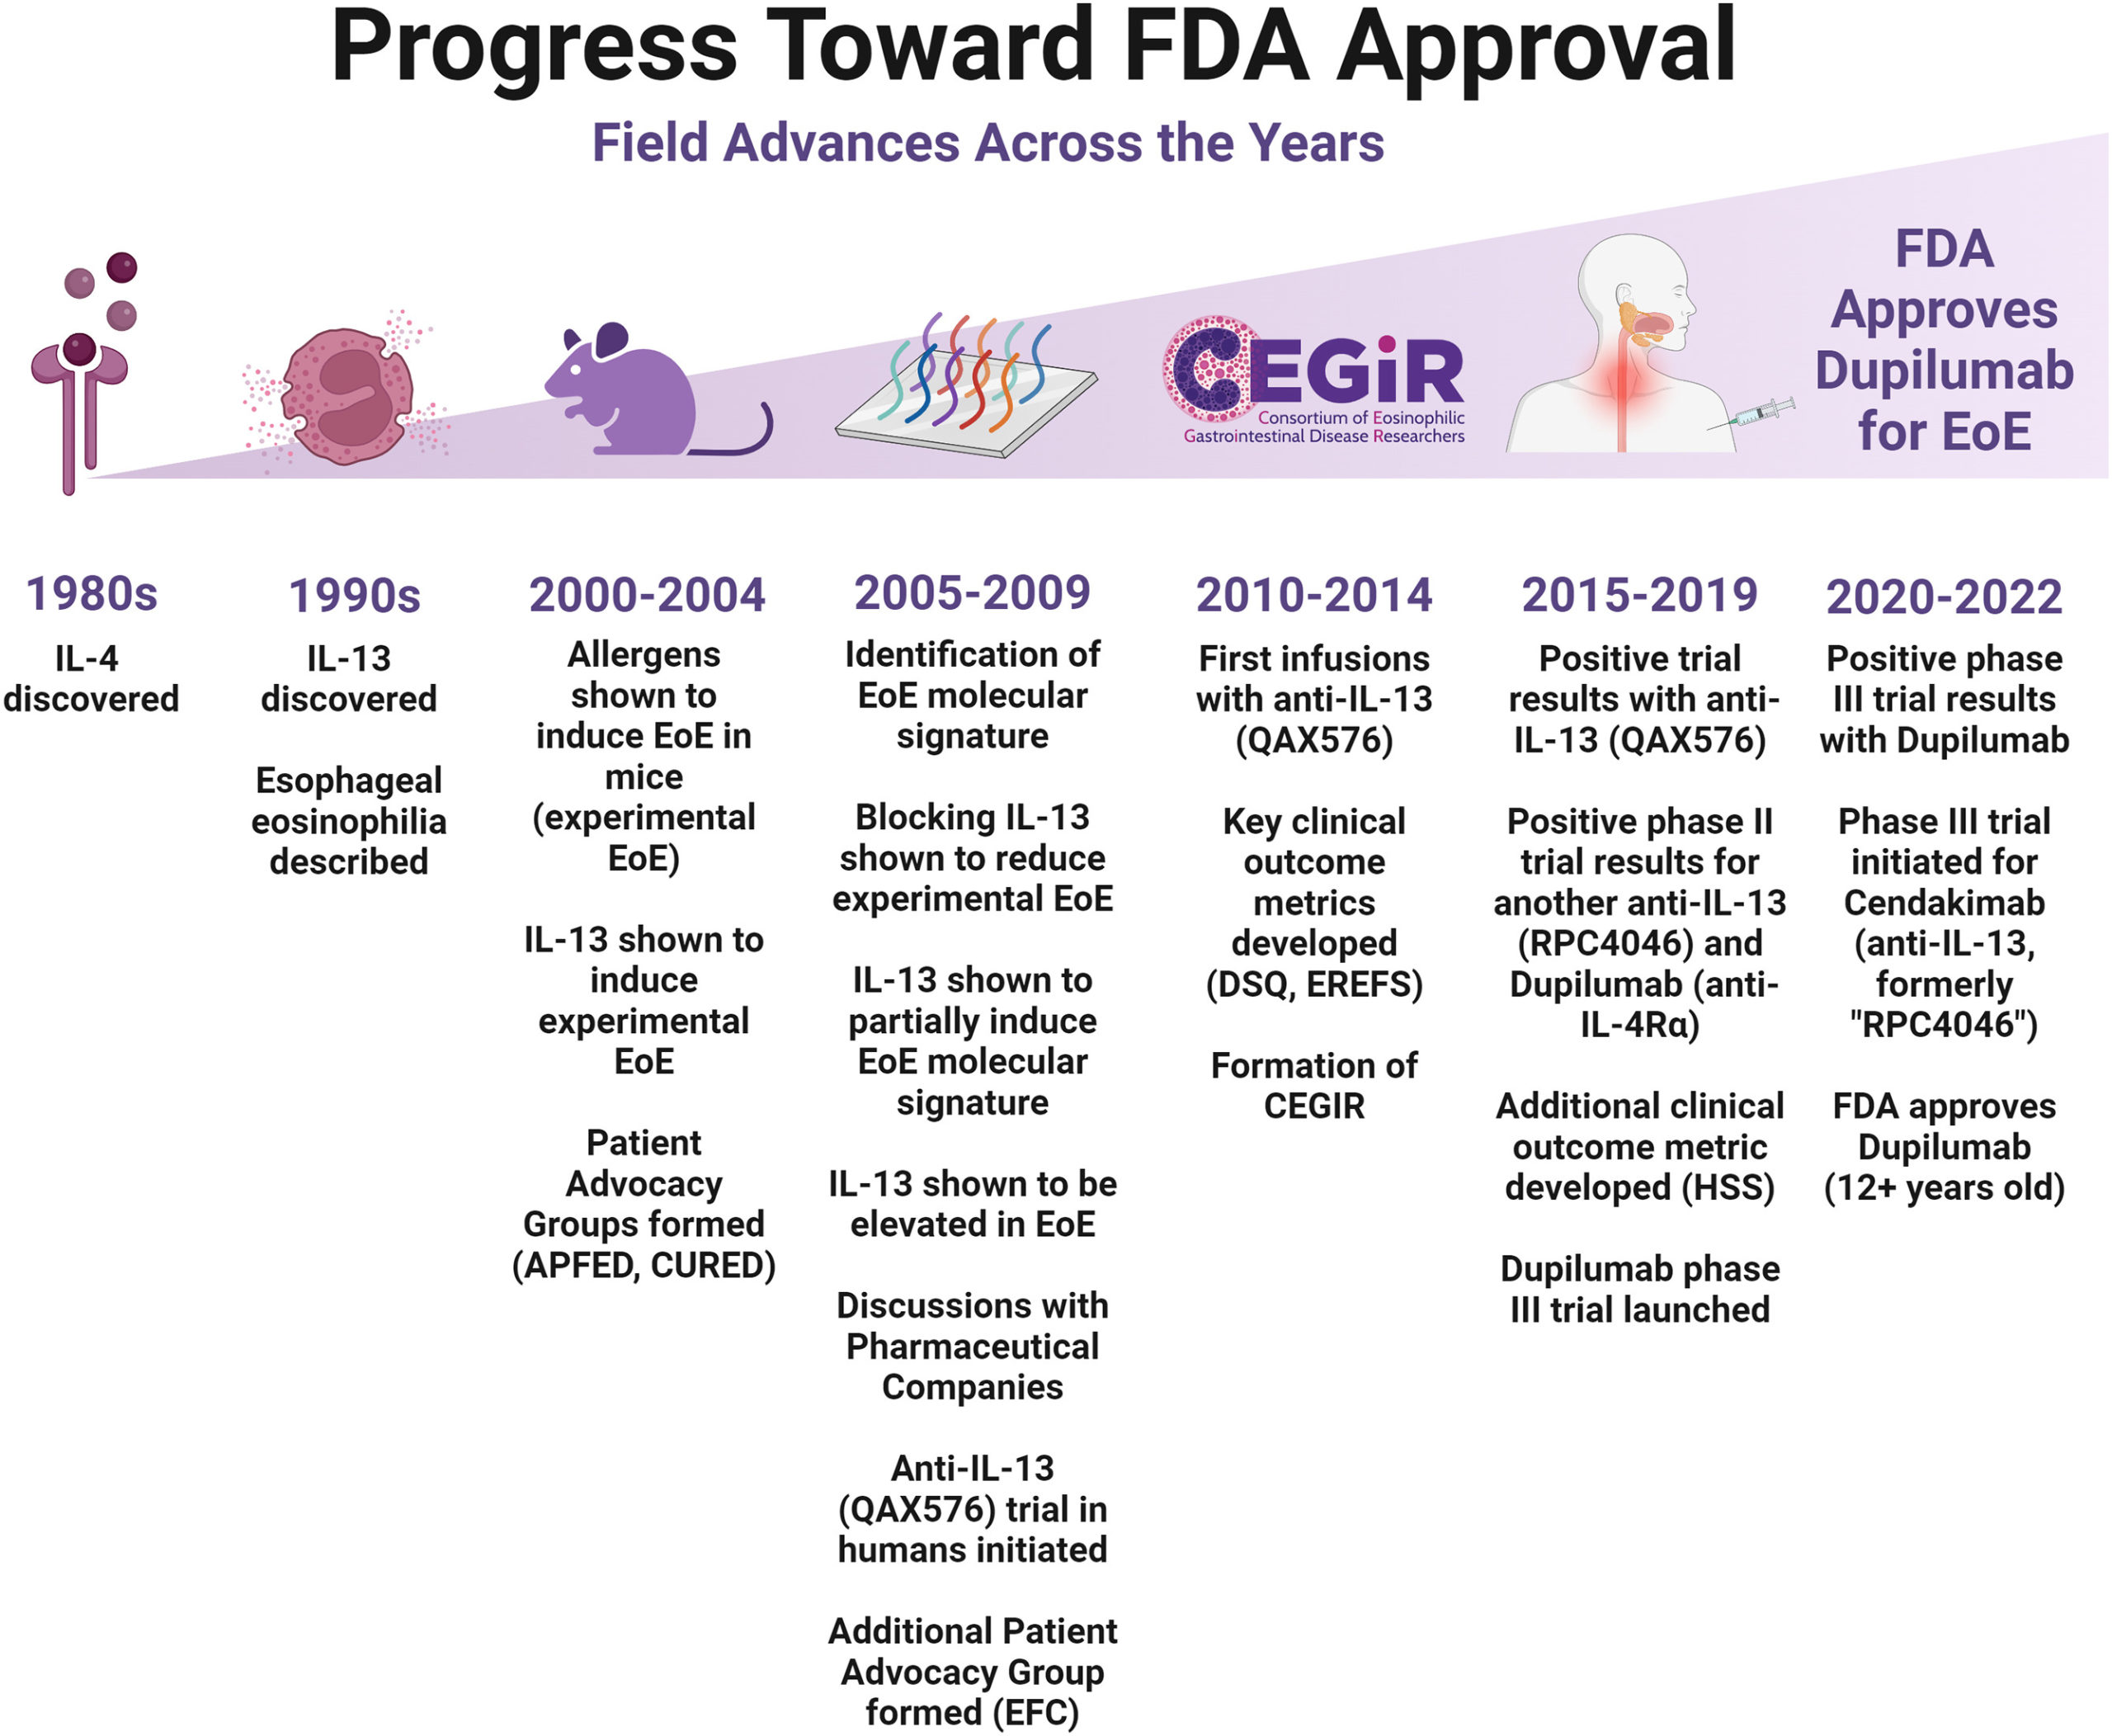 Dr. Rothenberg and colleagues at Cincinnati Children's have played central roles from the beginning of the EoE journey; from establishing the condition as its own disease to characterizing the genetic and molecular pathways involved to co-leading the clinical trials that led to the FDA approval of dupilumab.